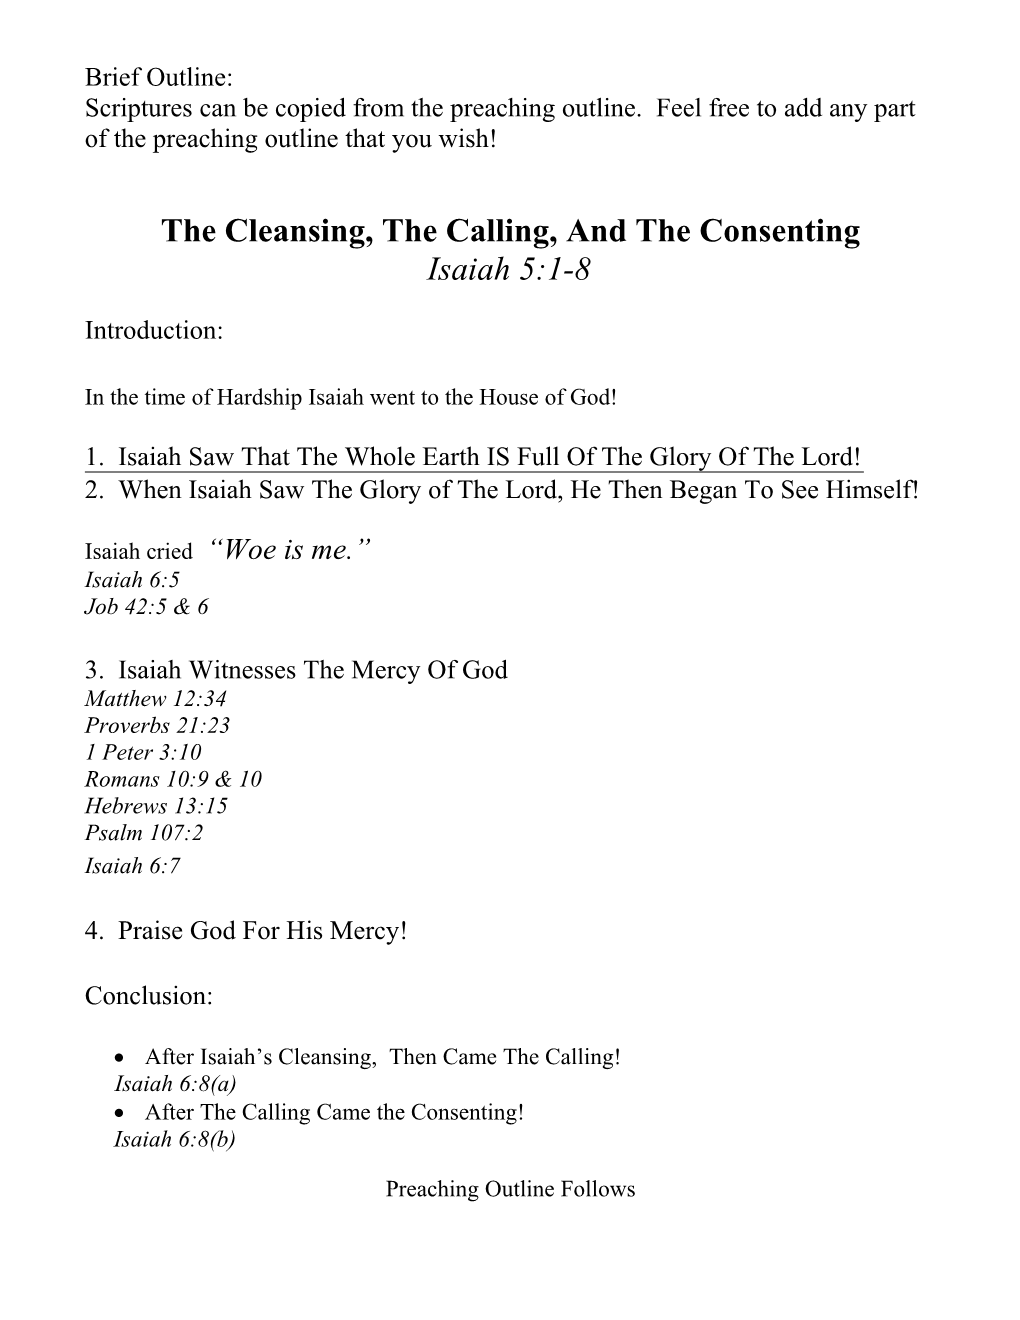 The Cleansing, the Calling, and the Consenting